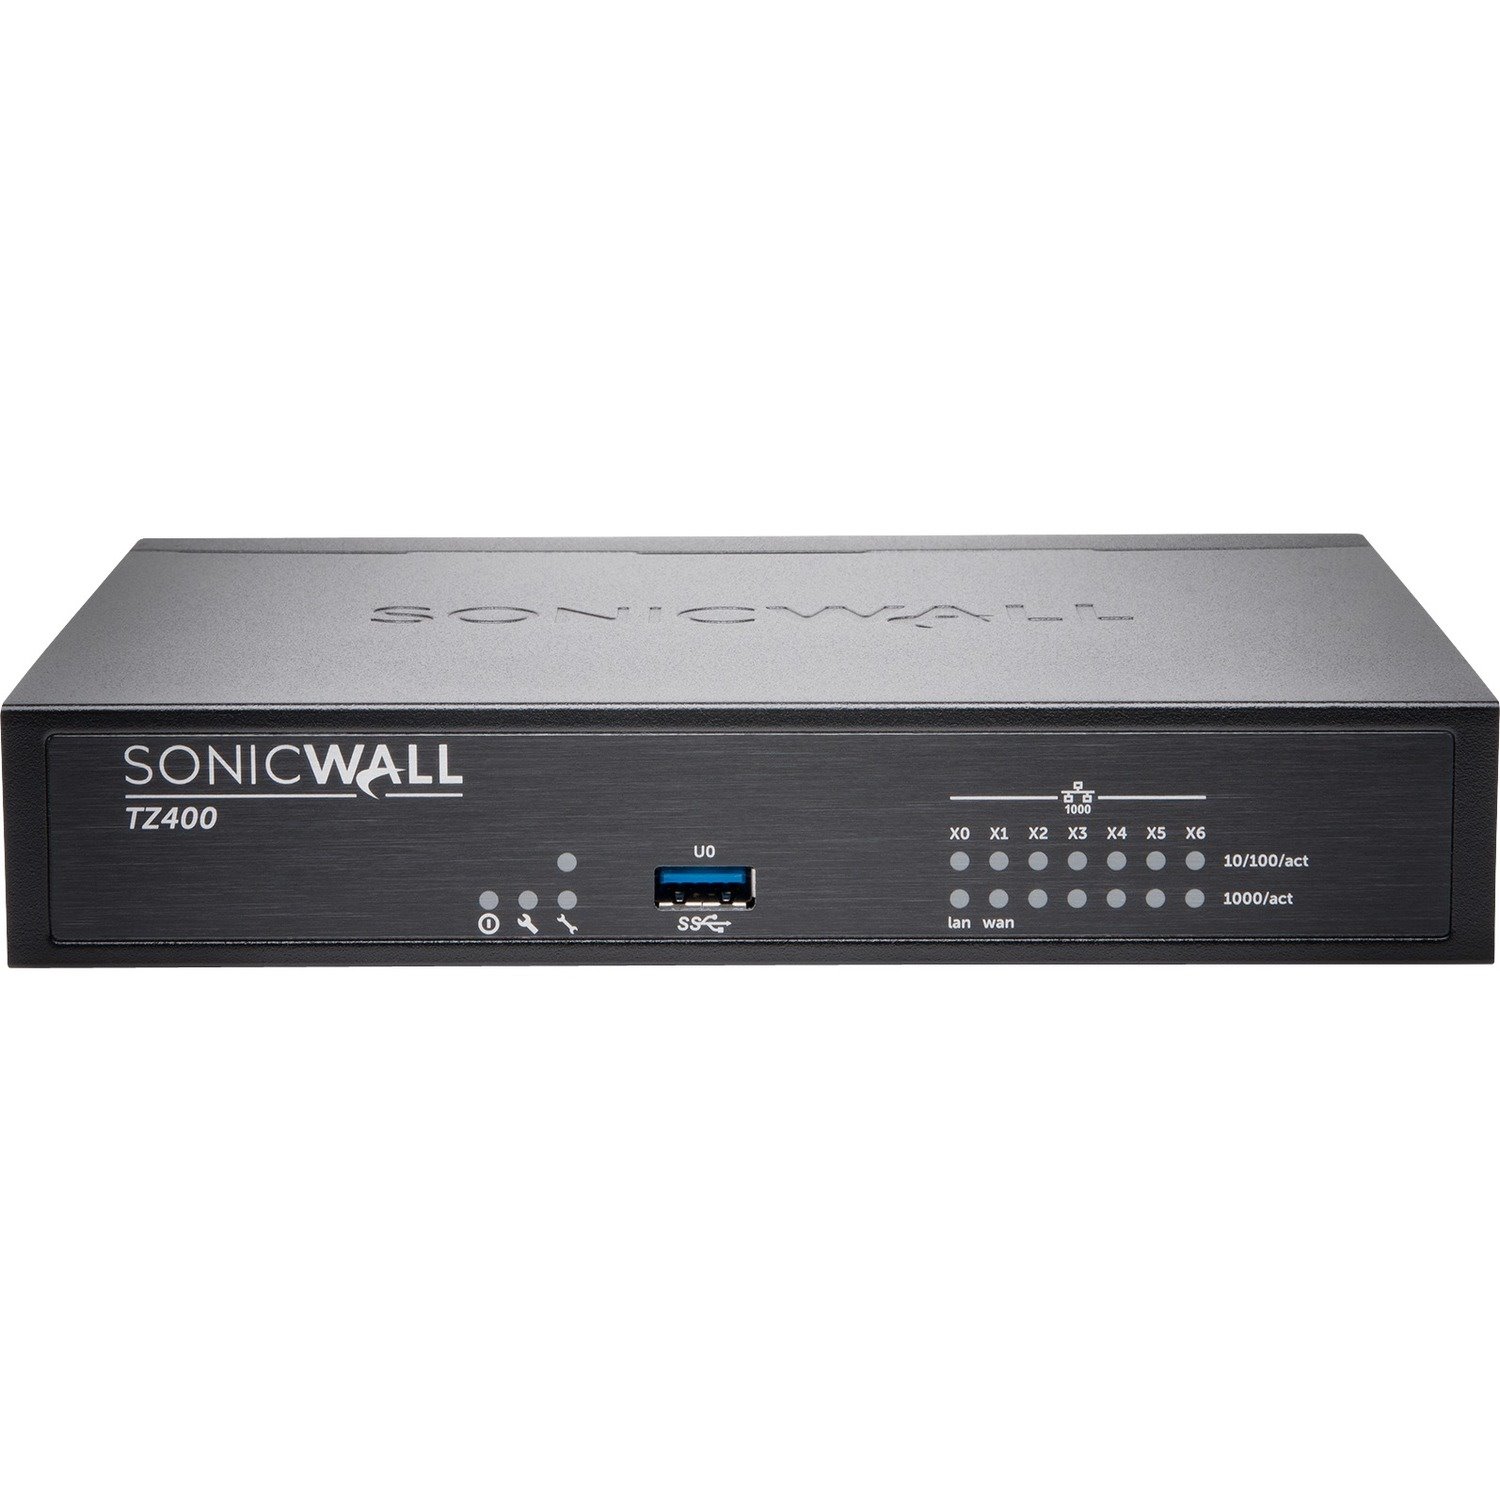 SonicWall TZ400 Network Security/Firewall Appliance with TotalSecure 1 Year